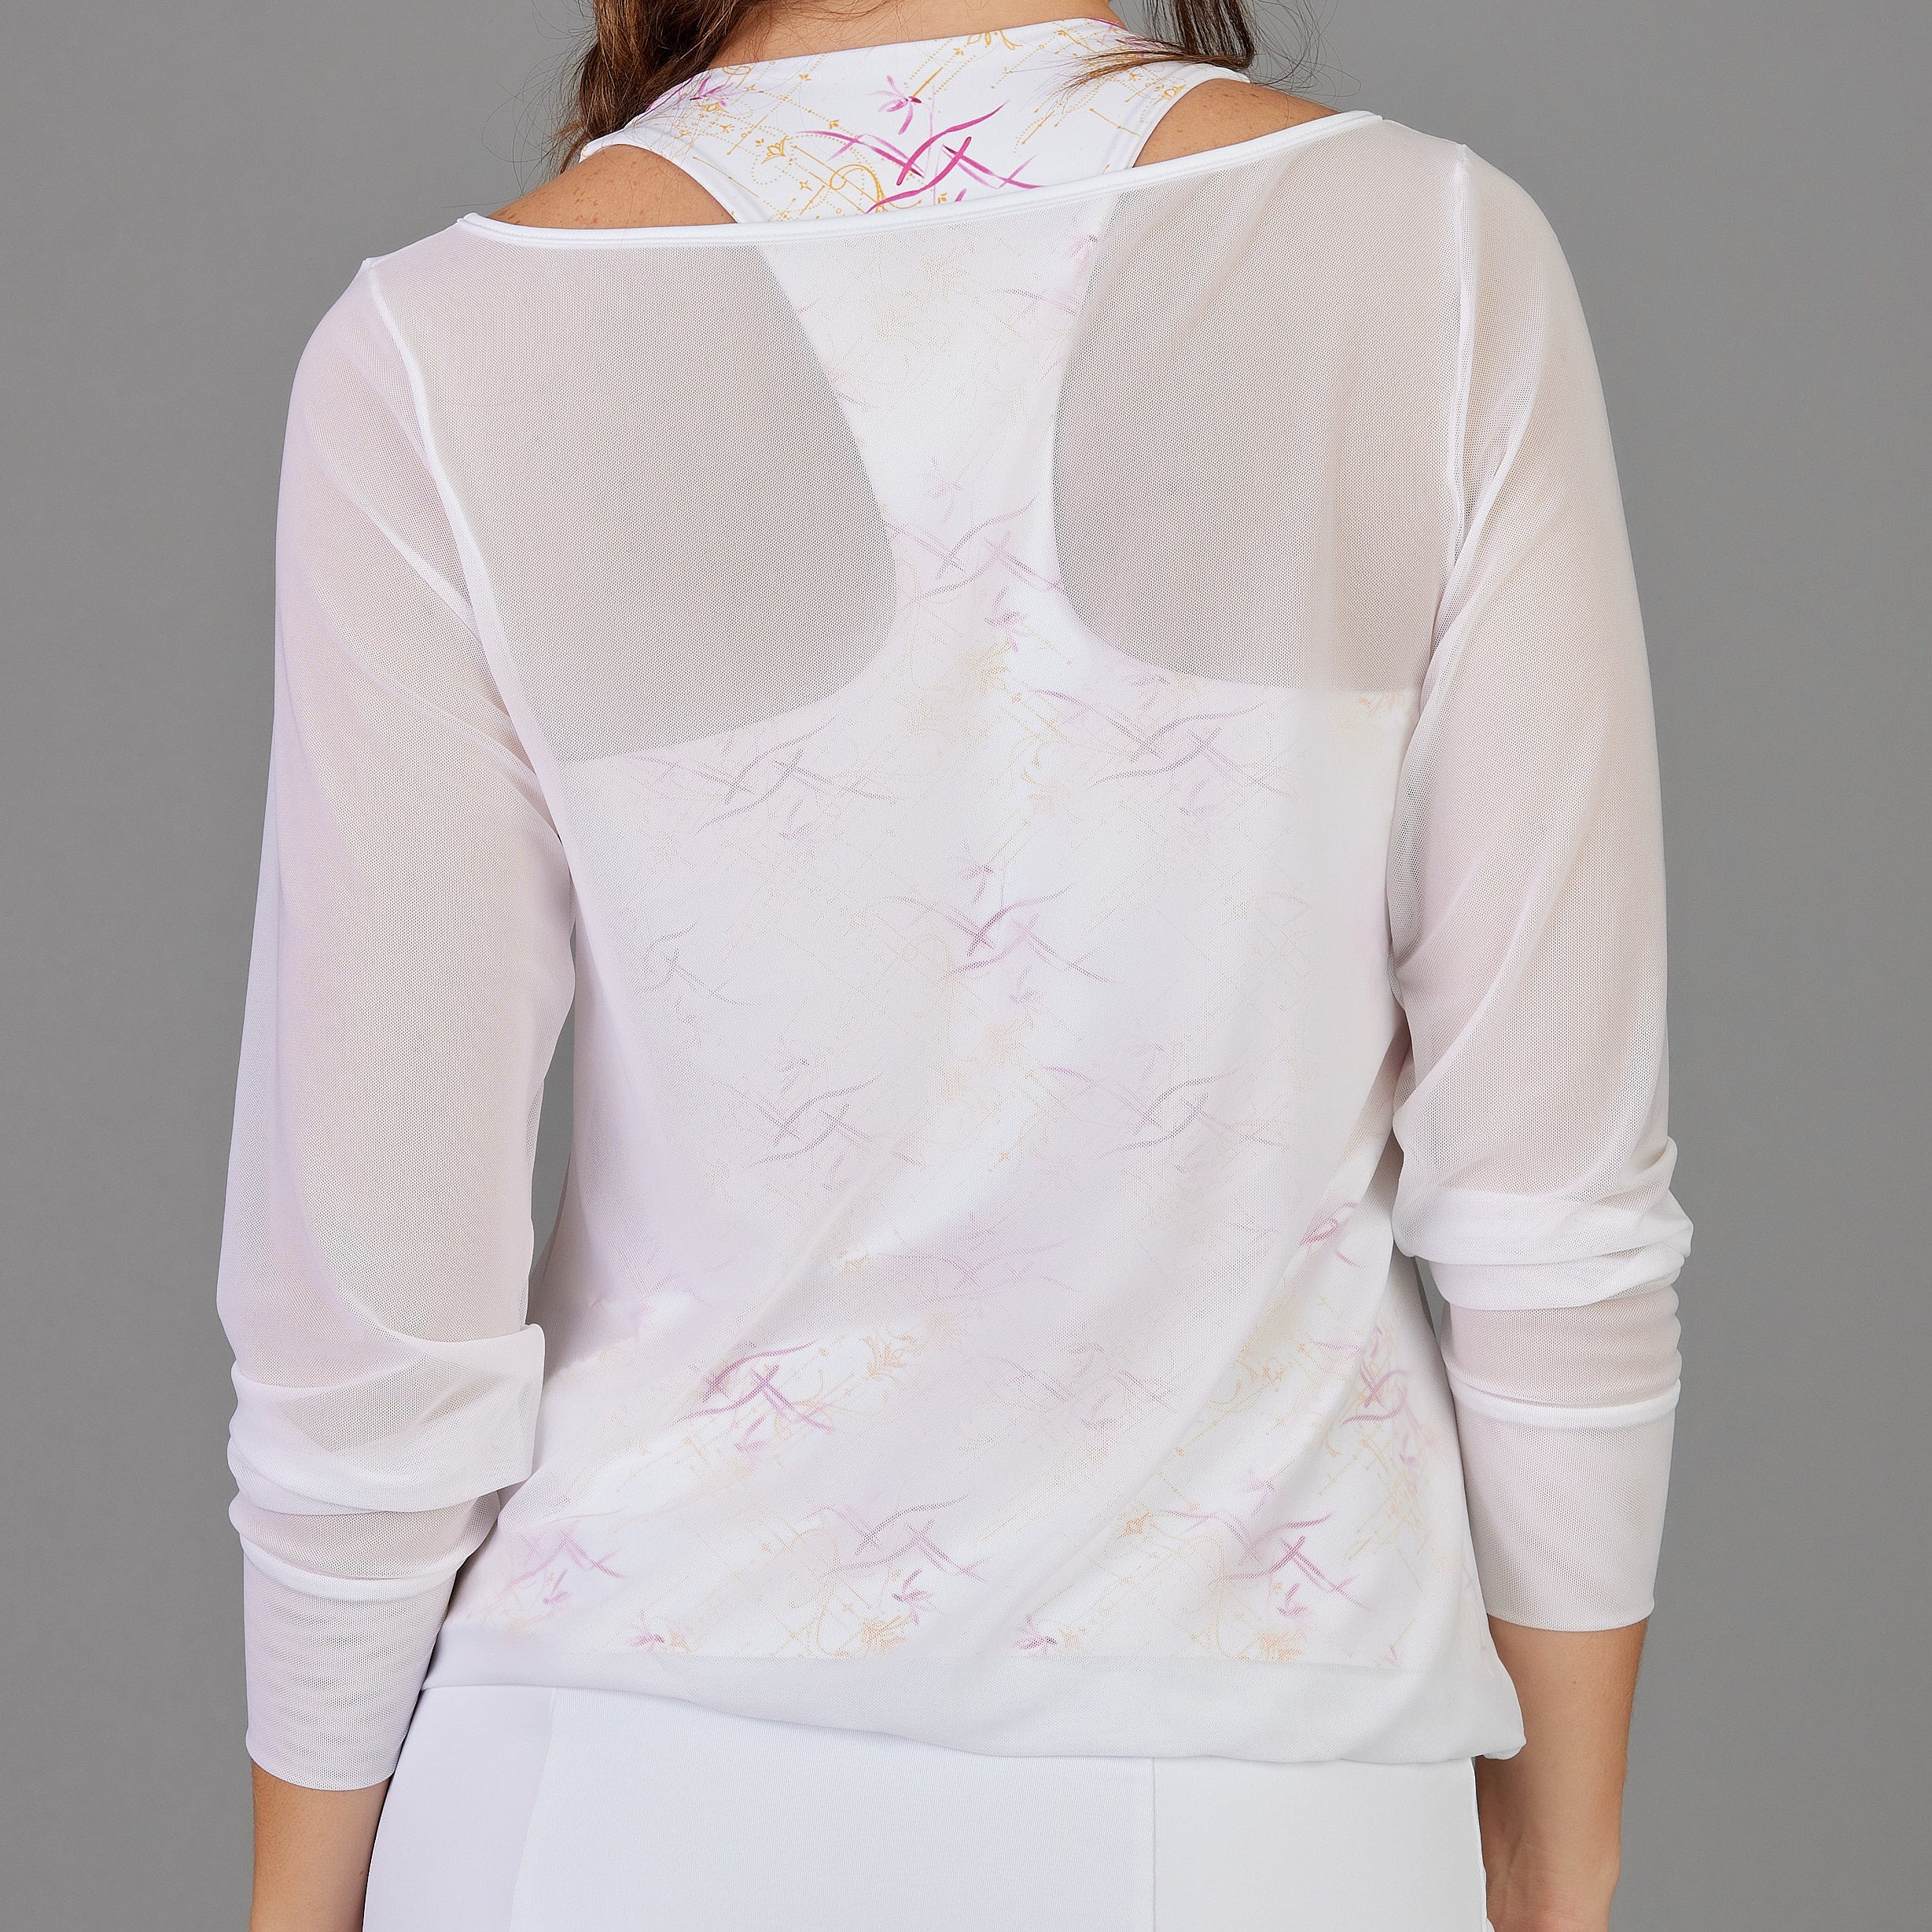 Pullover Top (white mesh)  Denise Cronwall Activewear